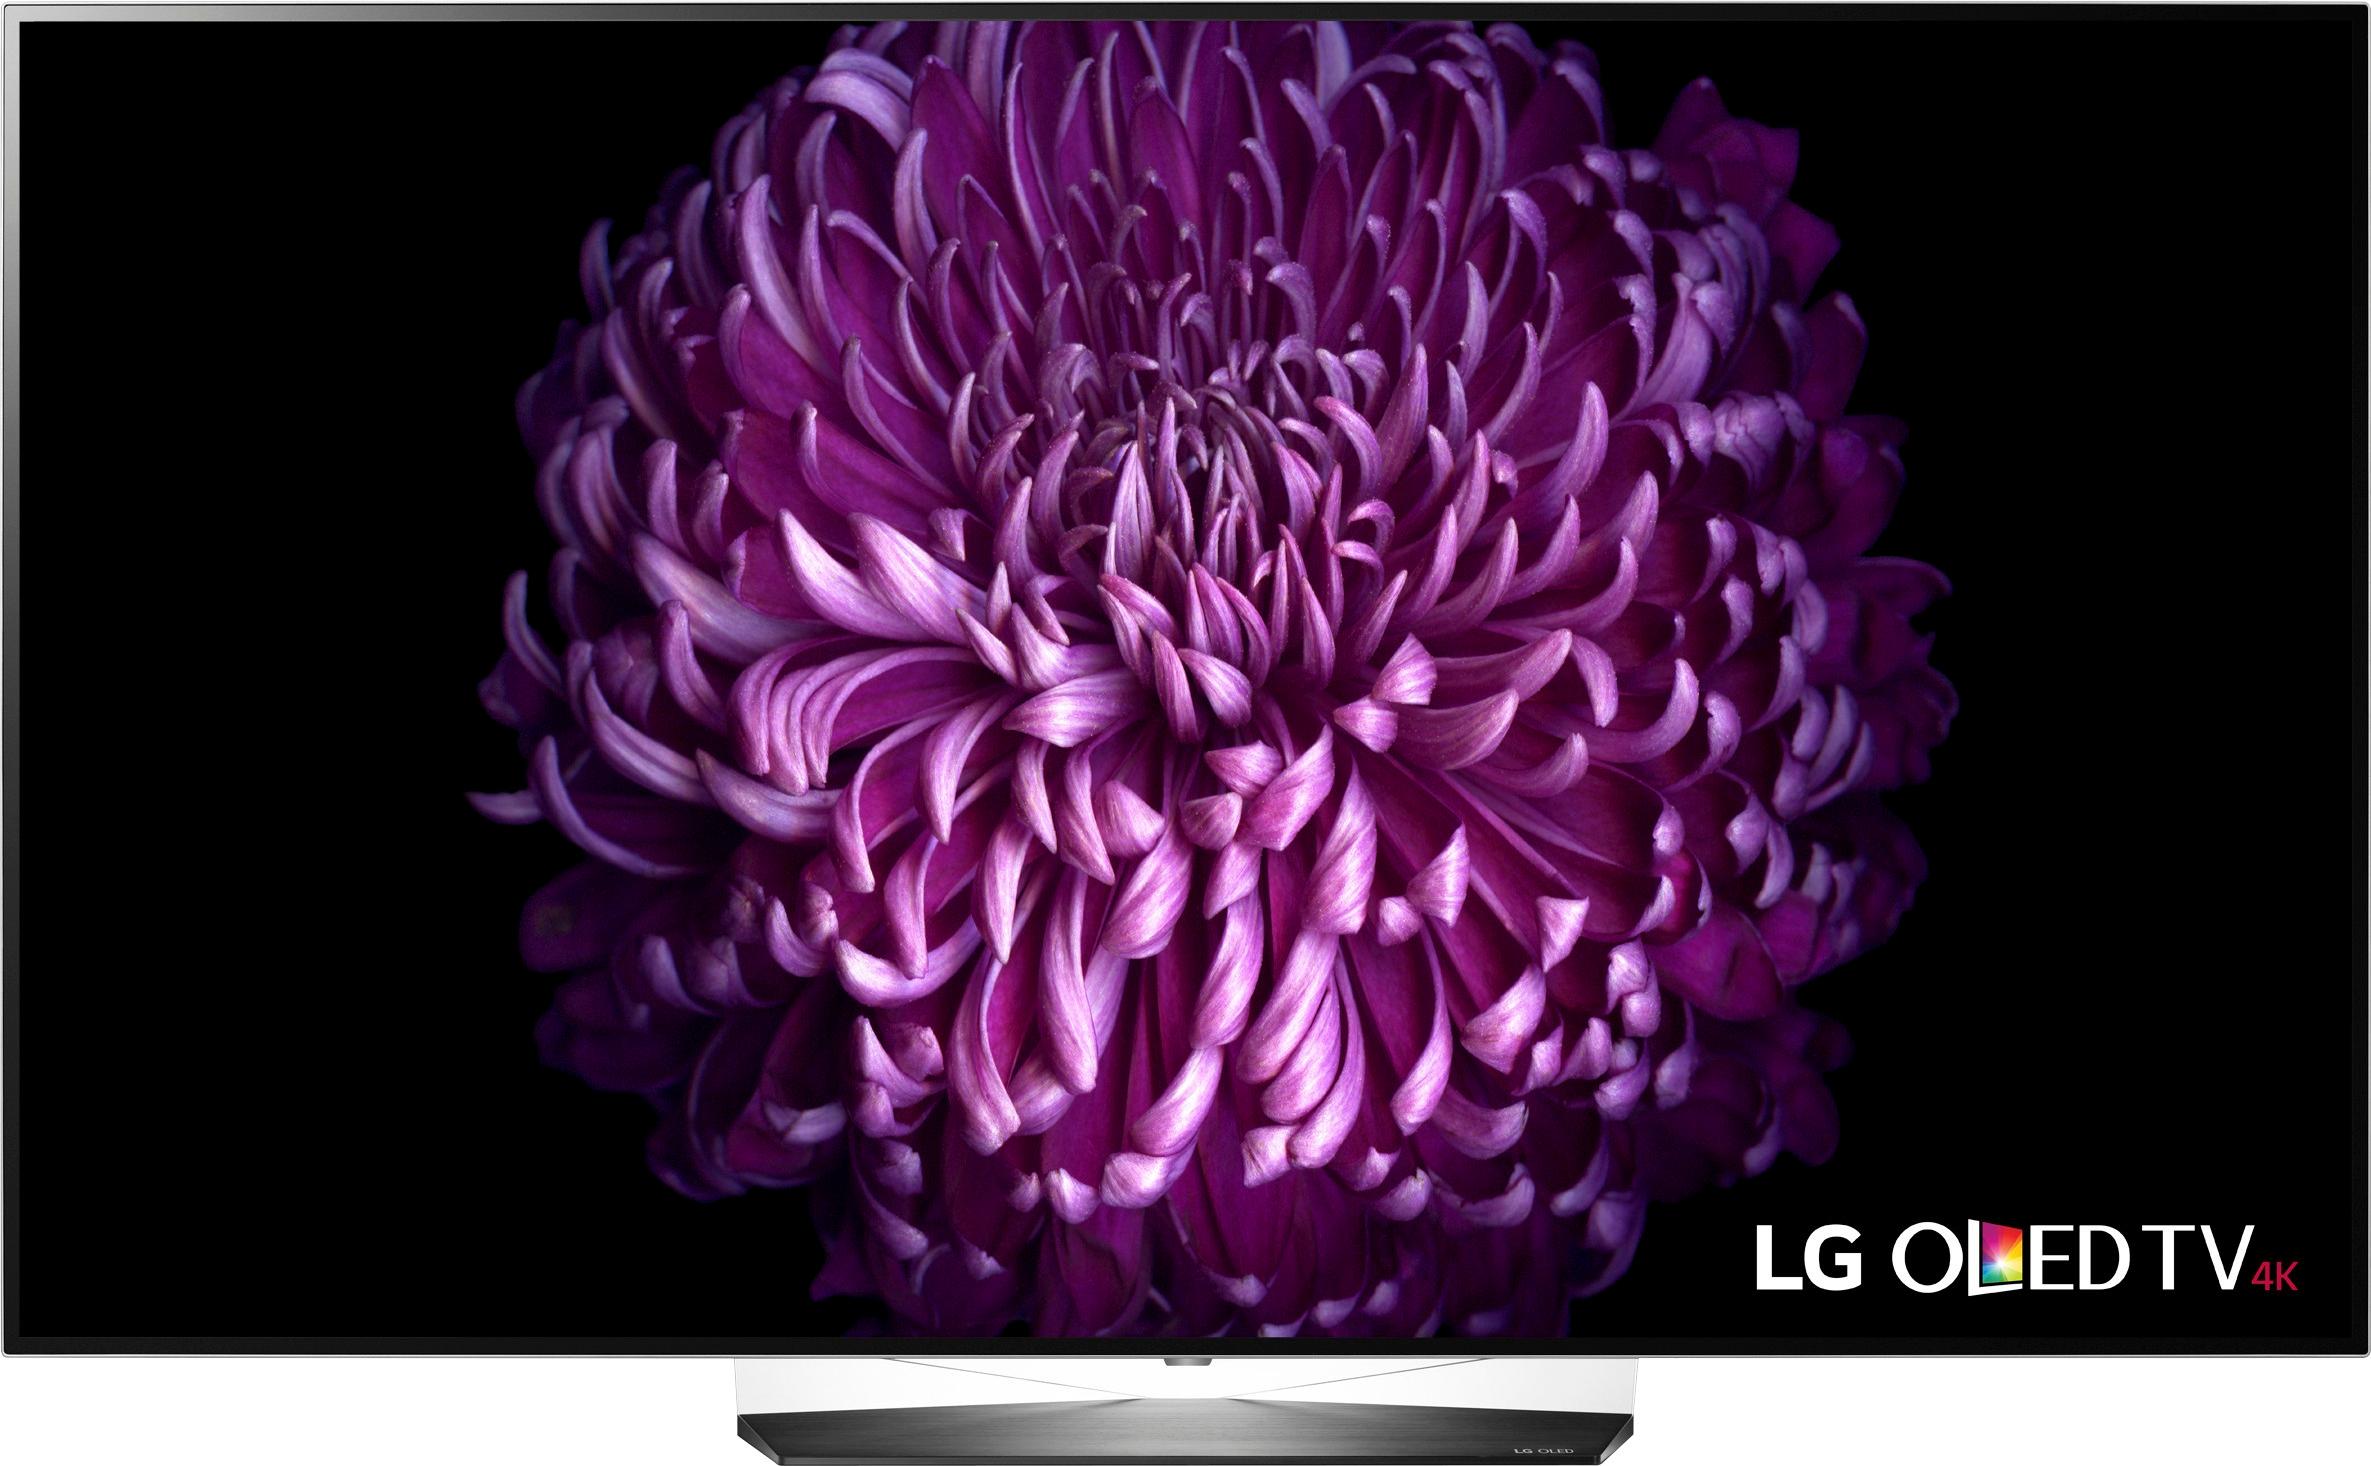 Best Buy Lg 65 Class Oled B7a Series 2160p Smart 4k Uhd Tv With